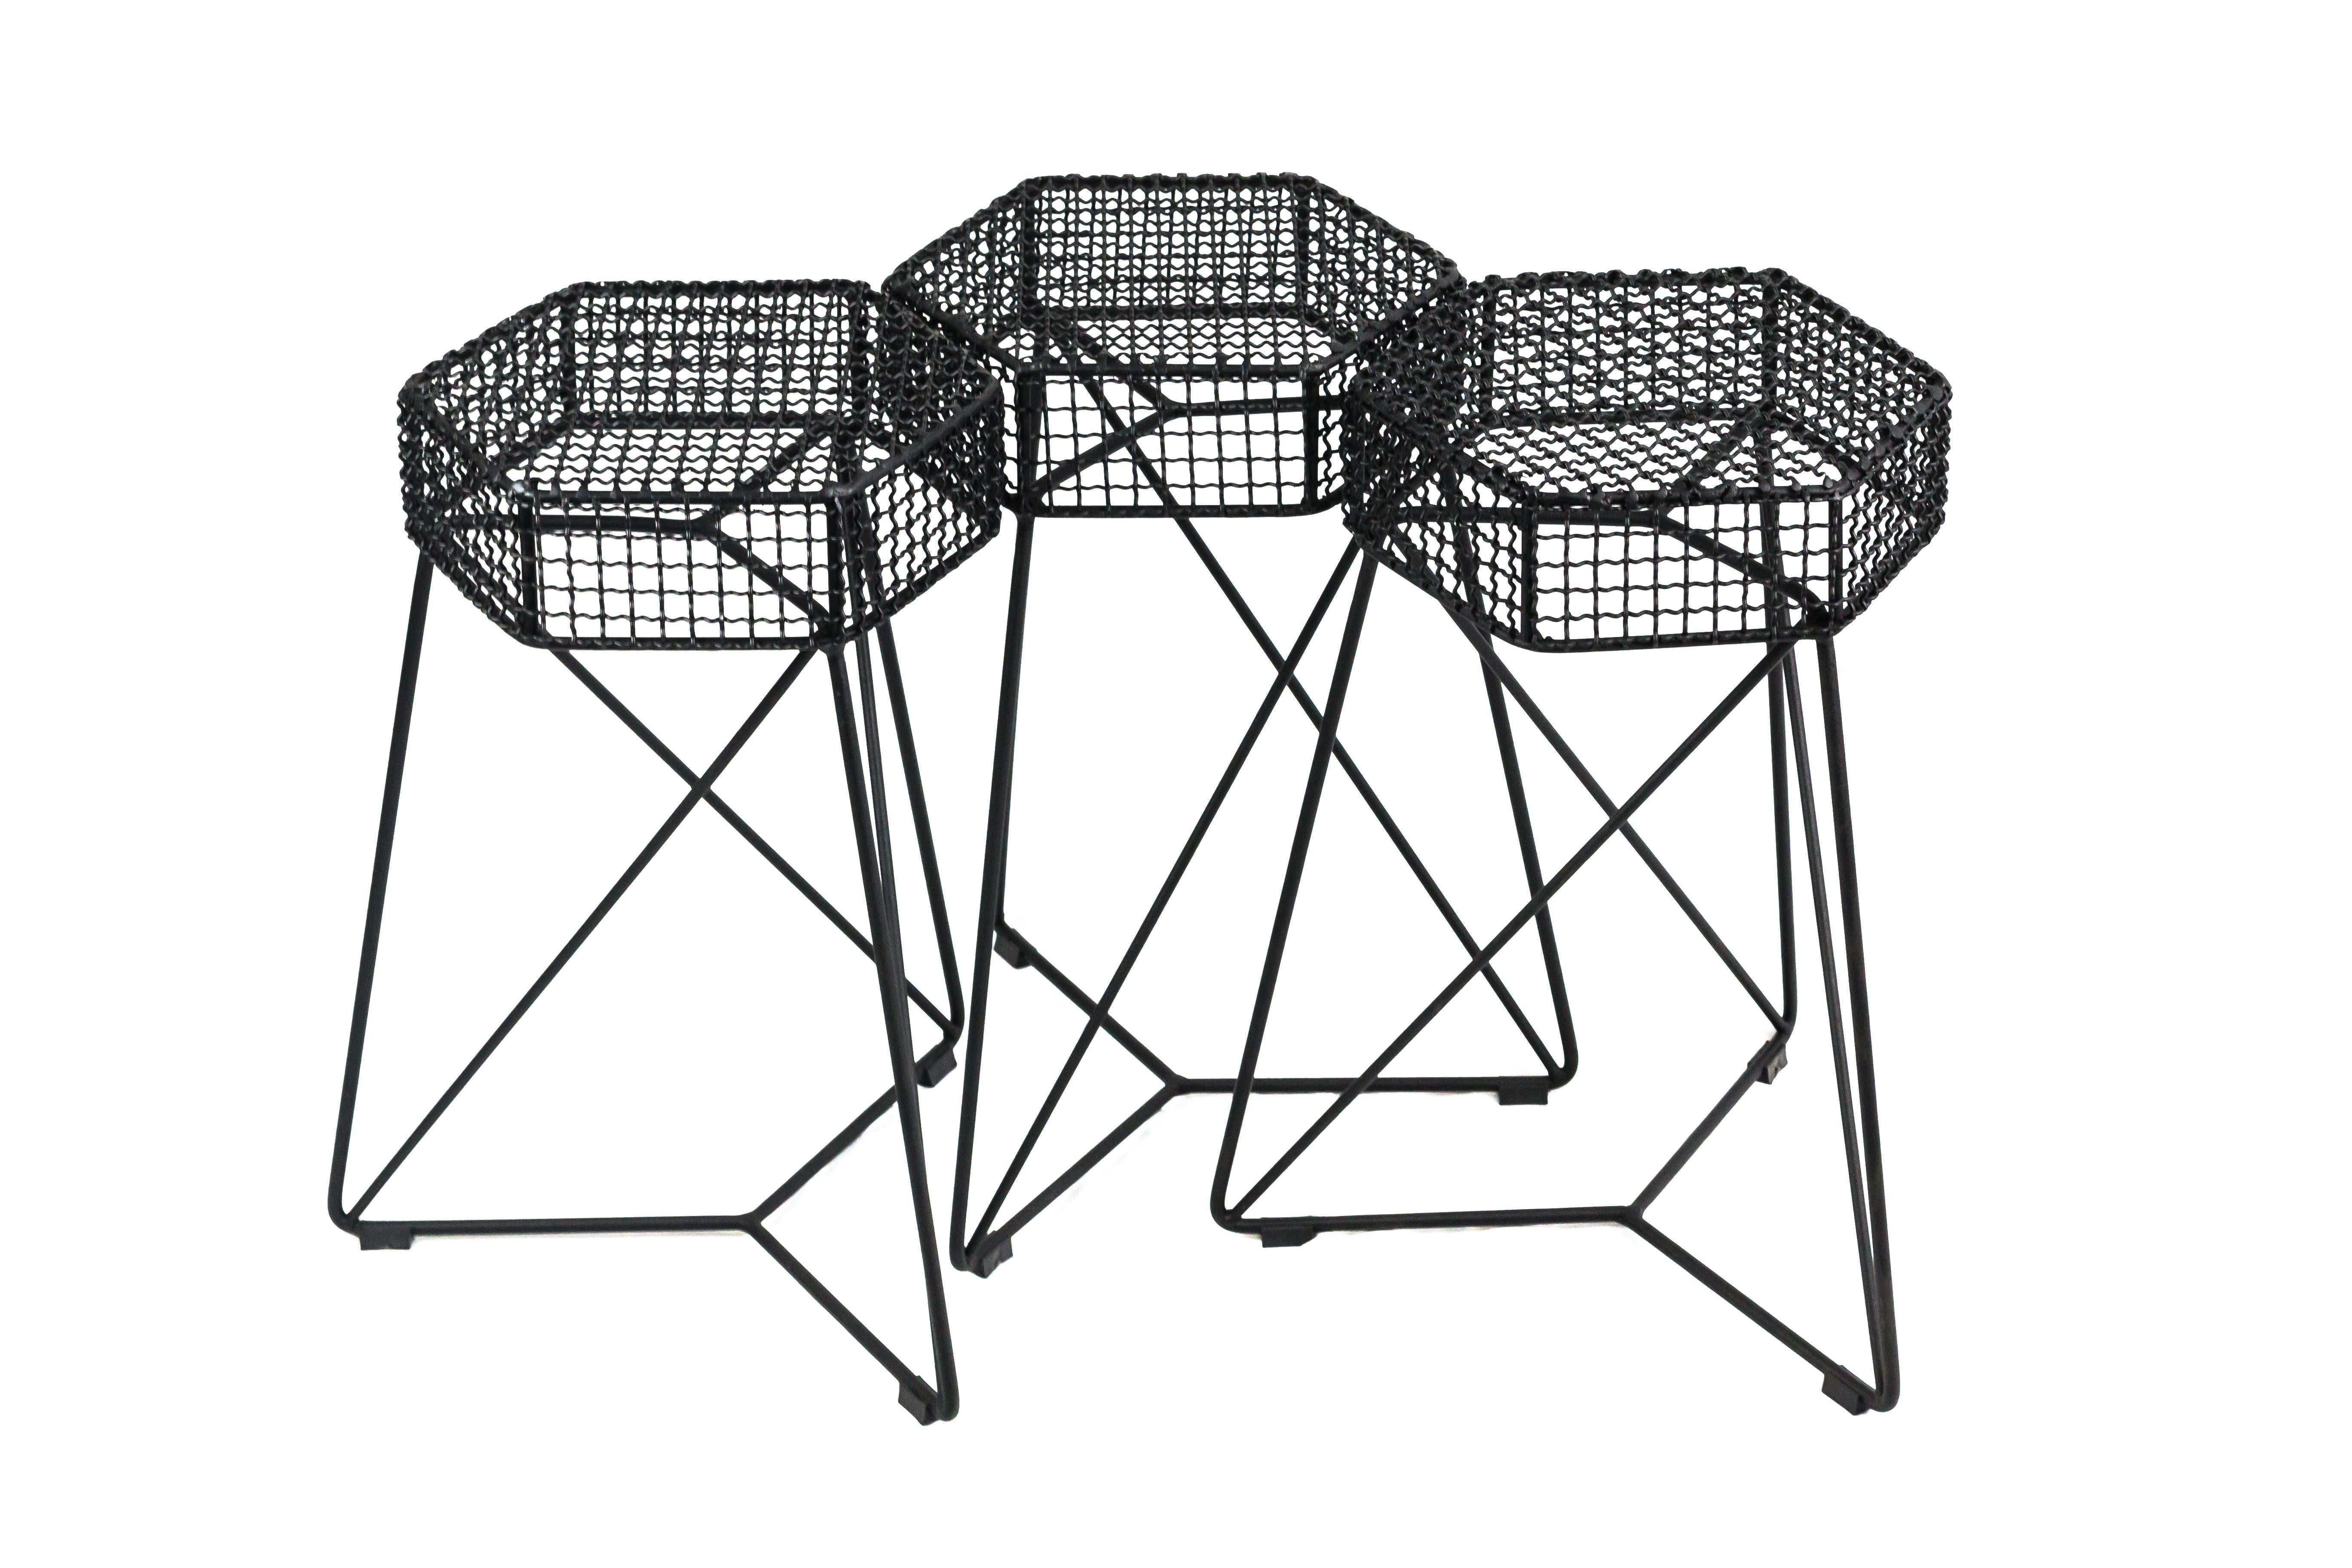 The Grid stool is an use adaptation from an imaginary urban element, where the seat creates a relation between its weight and lightness with the structure. The seat is a grid block and its structure is made of solid iron finished in black